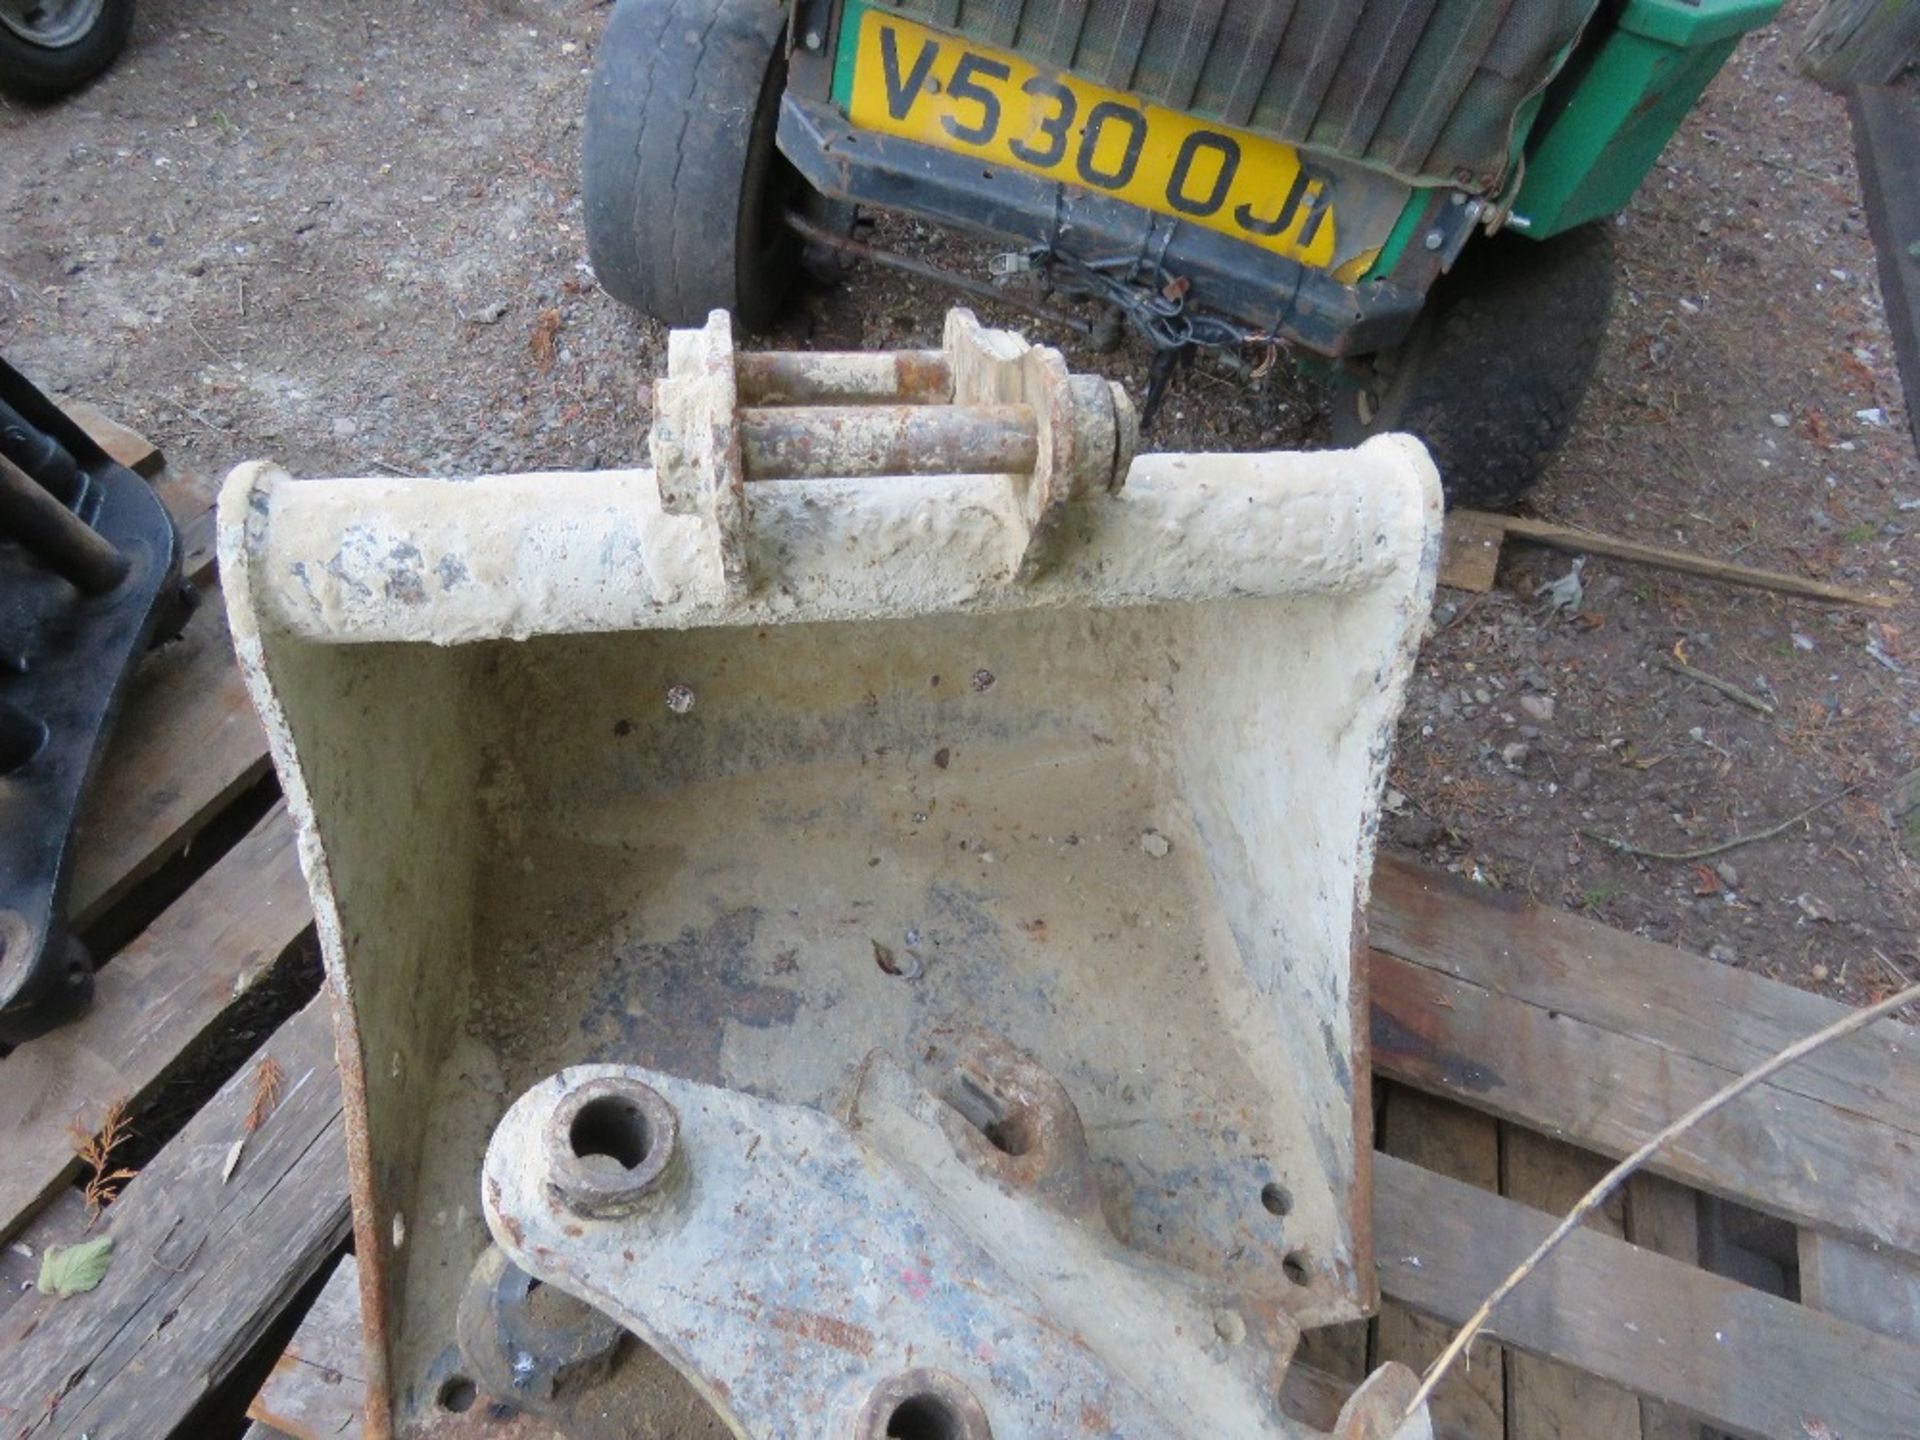 GRADING AND 2FT EXCAVATOR BUCKETS ON 30MM PINS WITH A QUICK HITCH THAT IS 35MM MACHINE TO 30MM BUCKE - Image 4 of 5